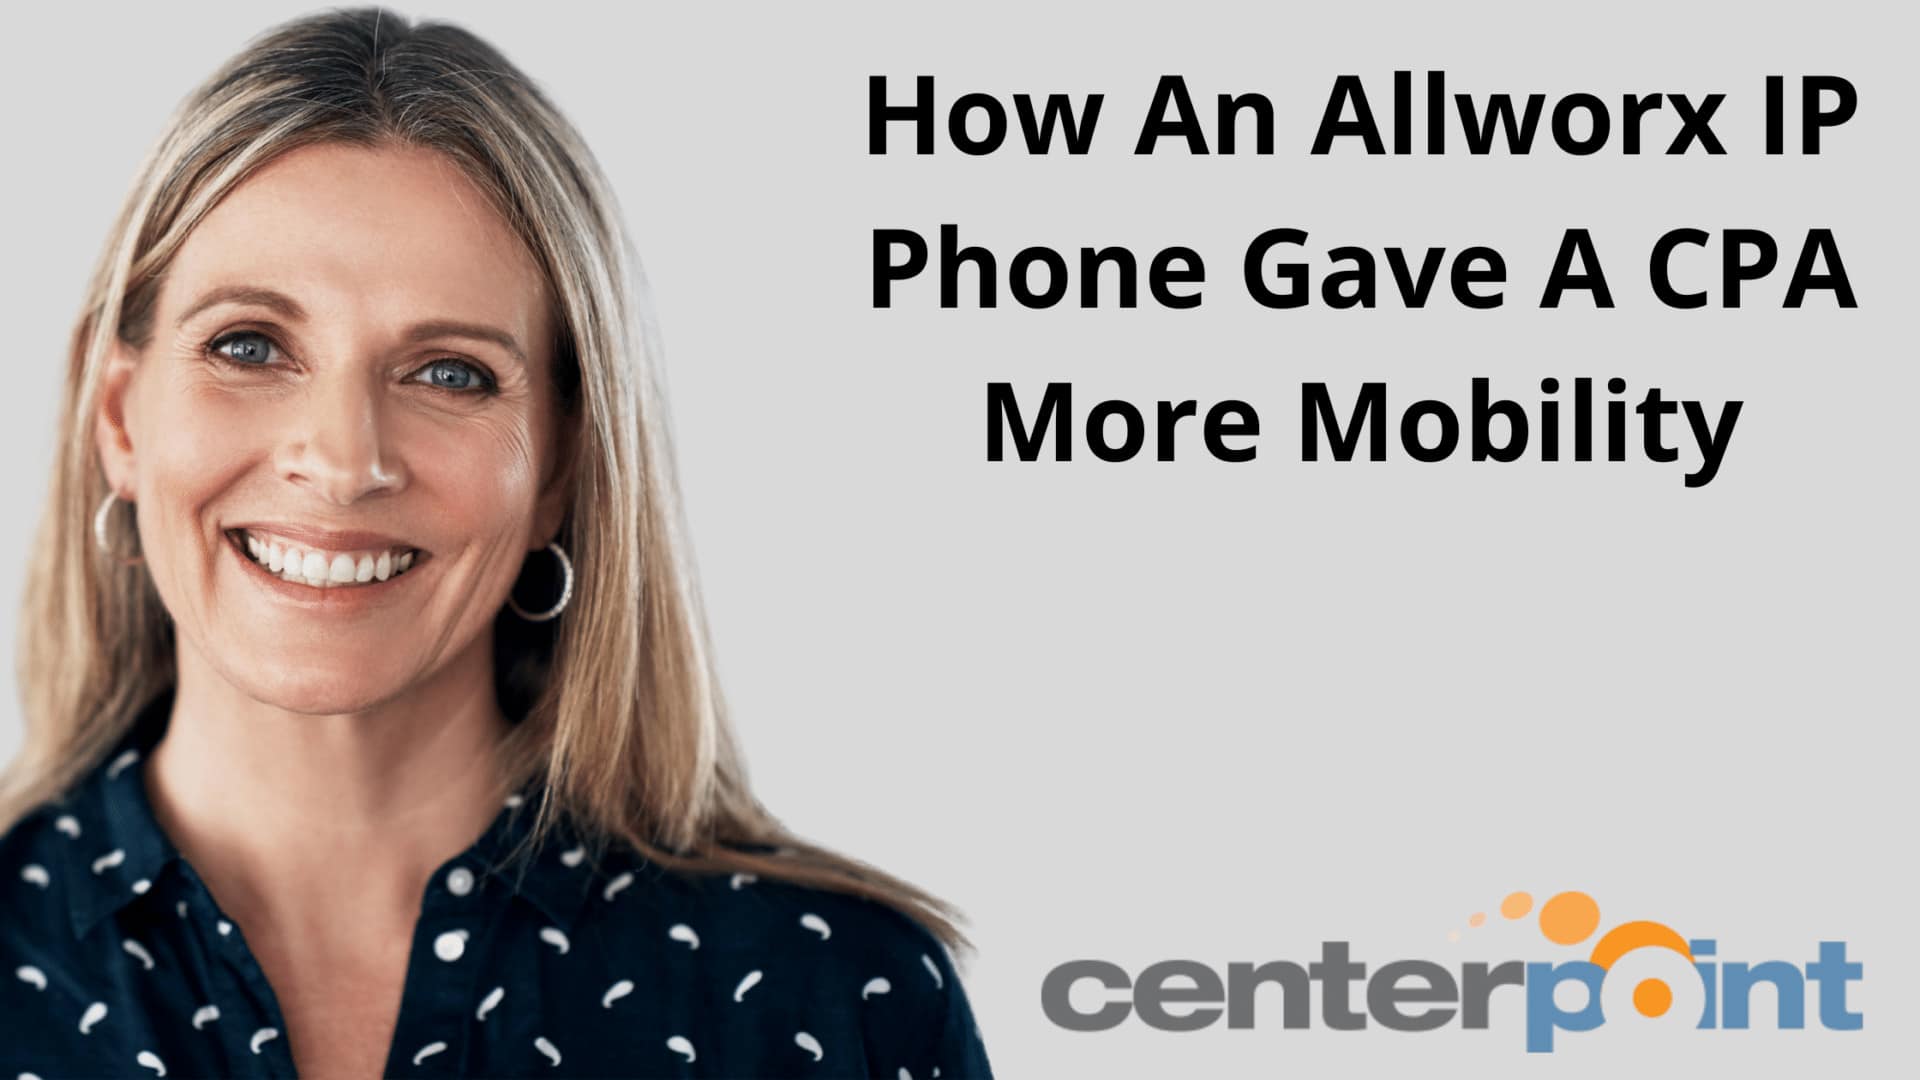 How An Allworx IP Phone Gave A CPA More Mobility